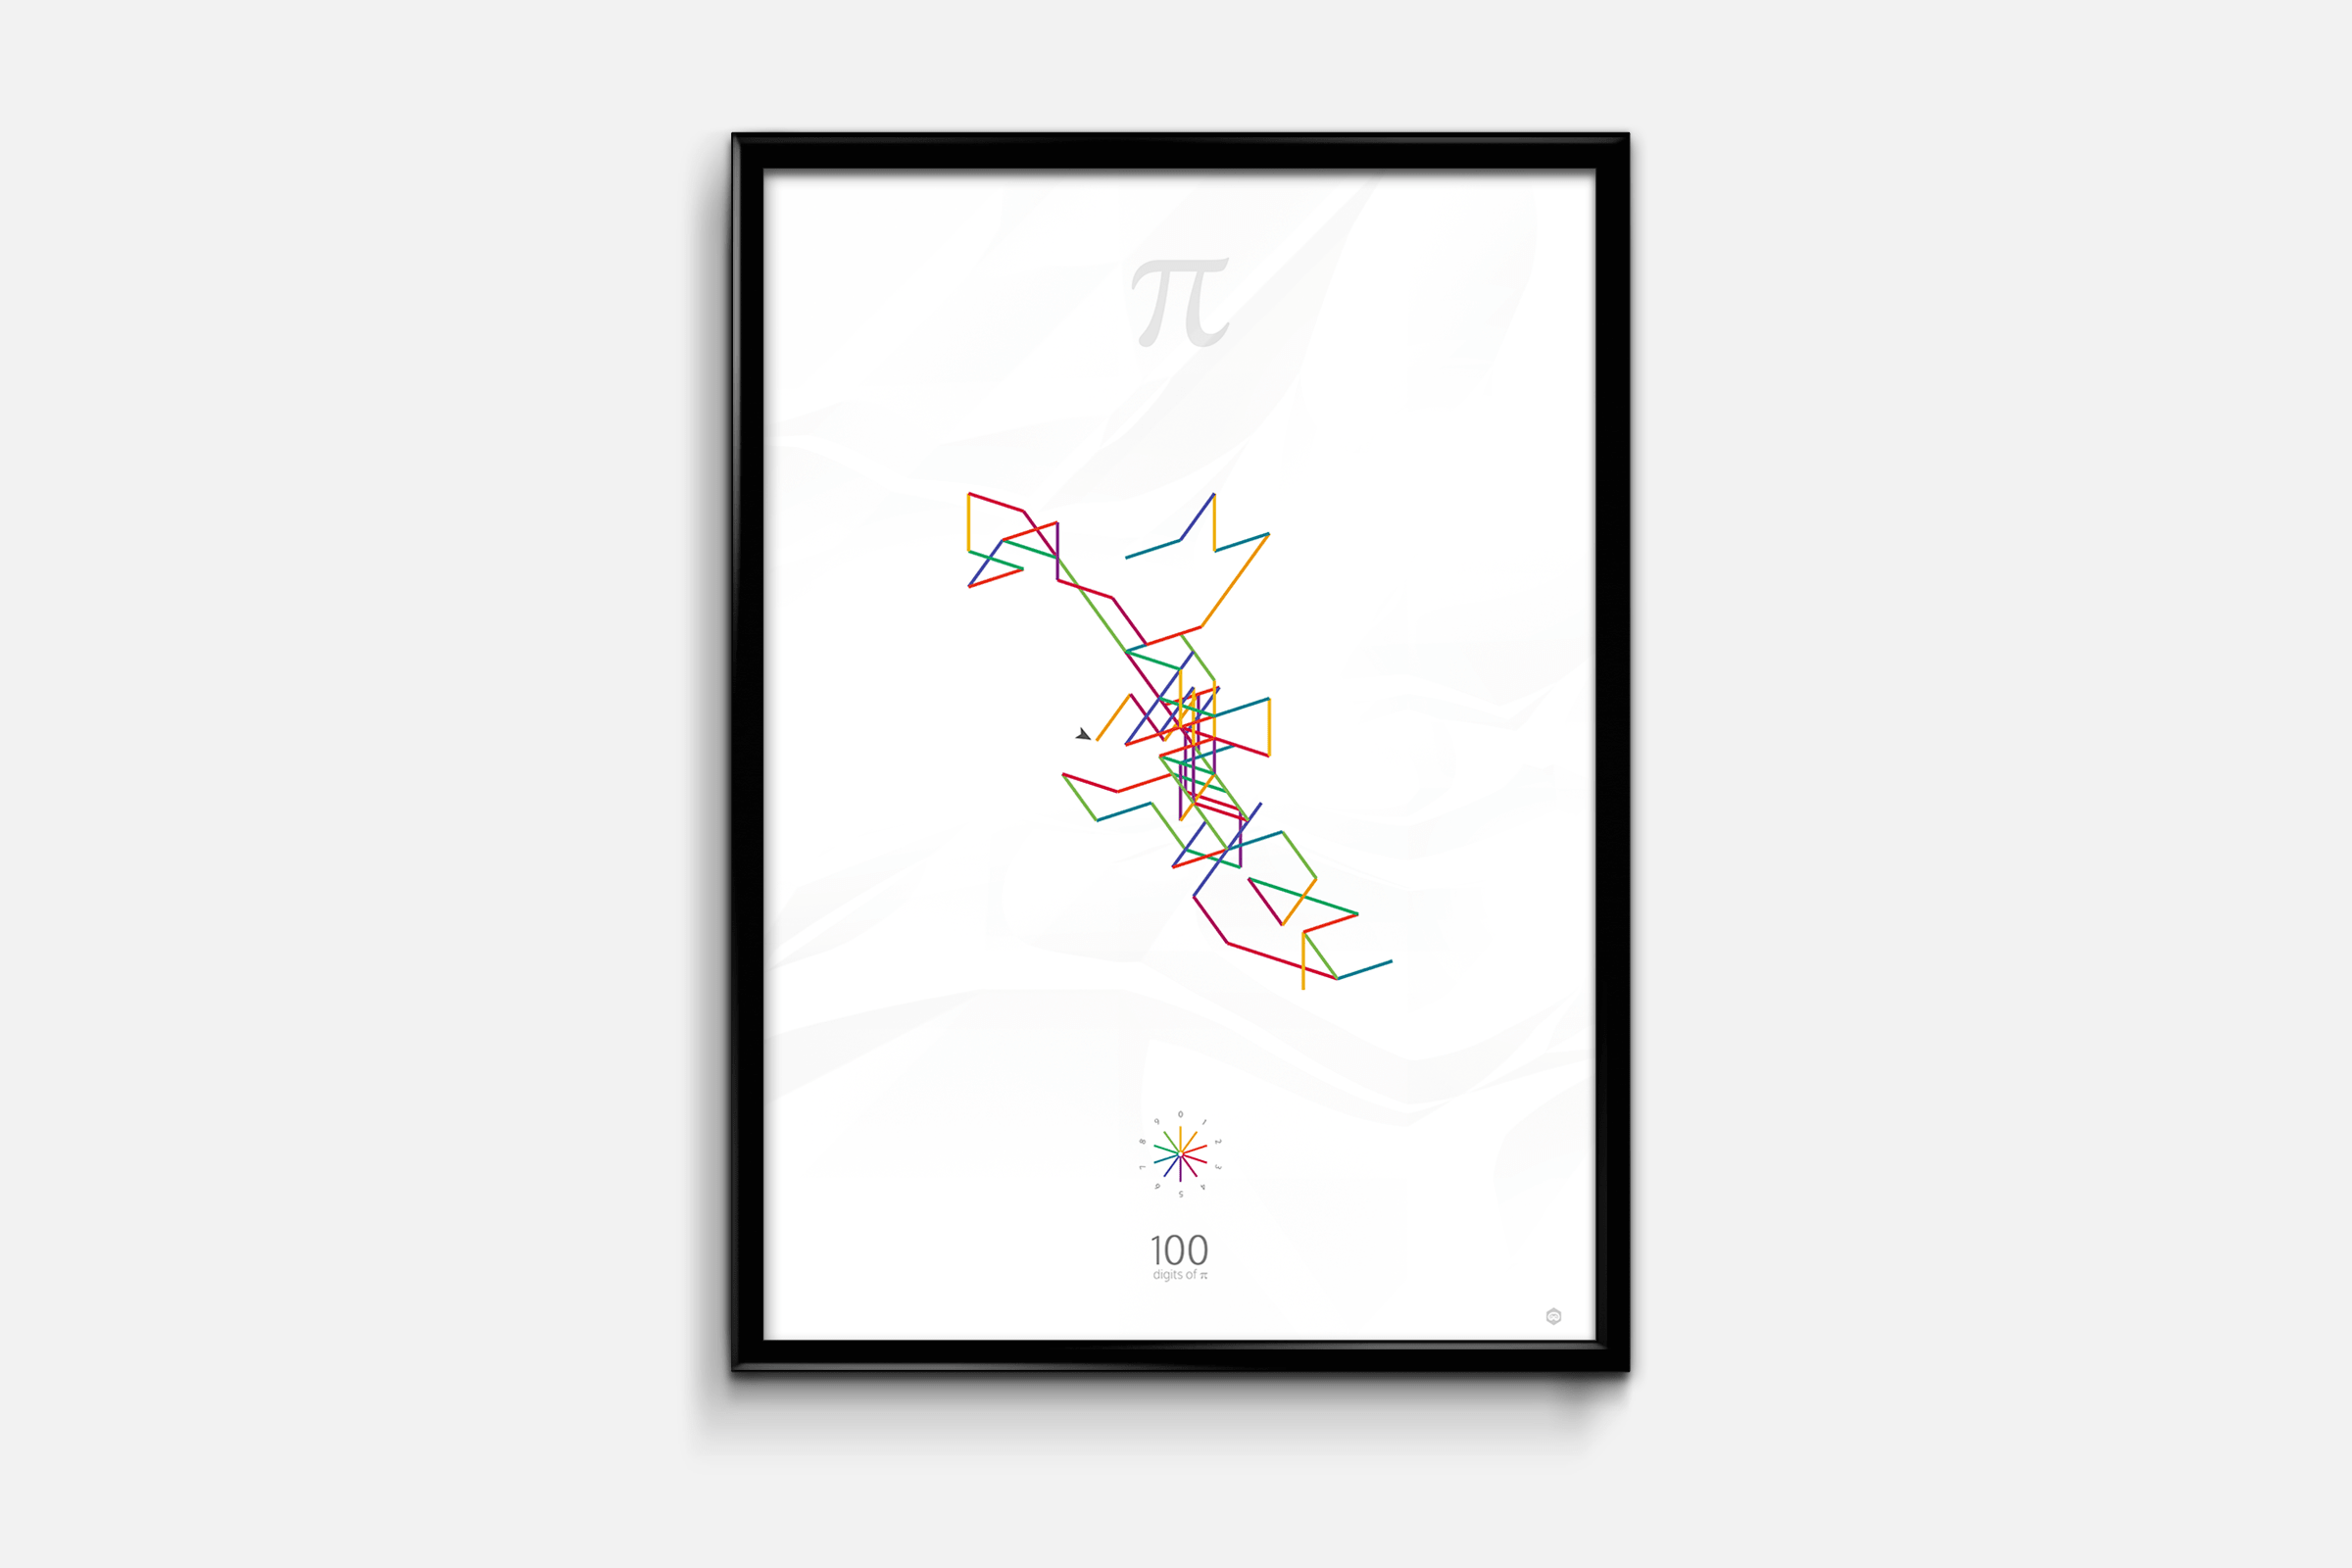 The poster of the first 100 digits of pi